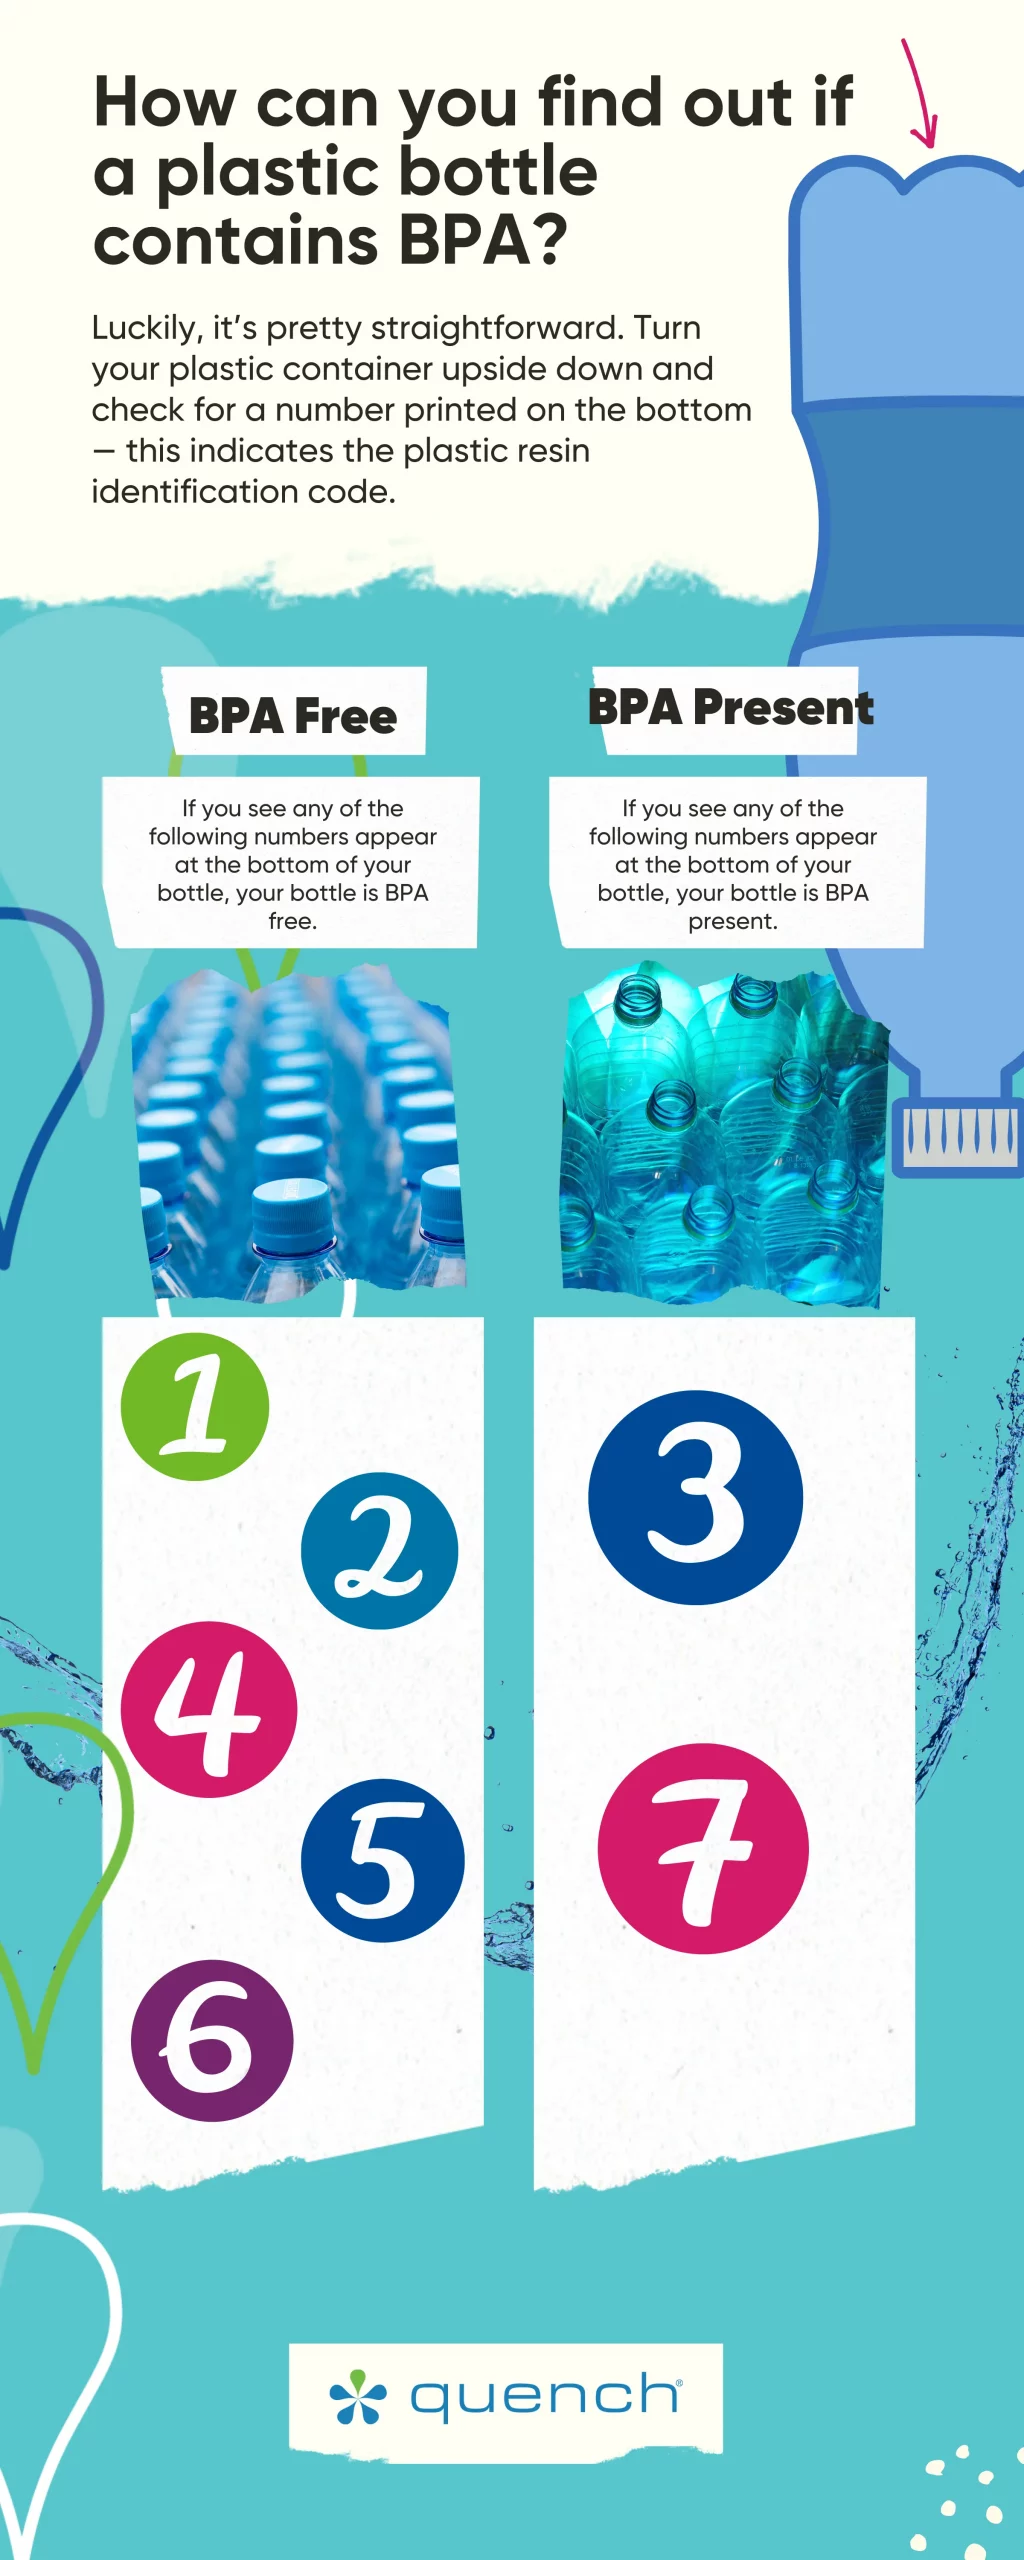 http://quenchwater.com/wp-content/uploads/2022/09/How-can-you-find-out-if-a-plastic-bottle-contains-BPA-scaled.webp